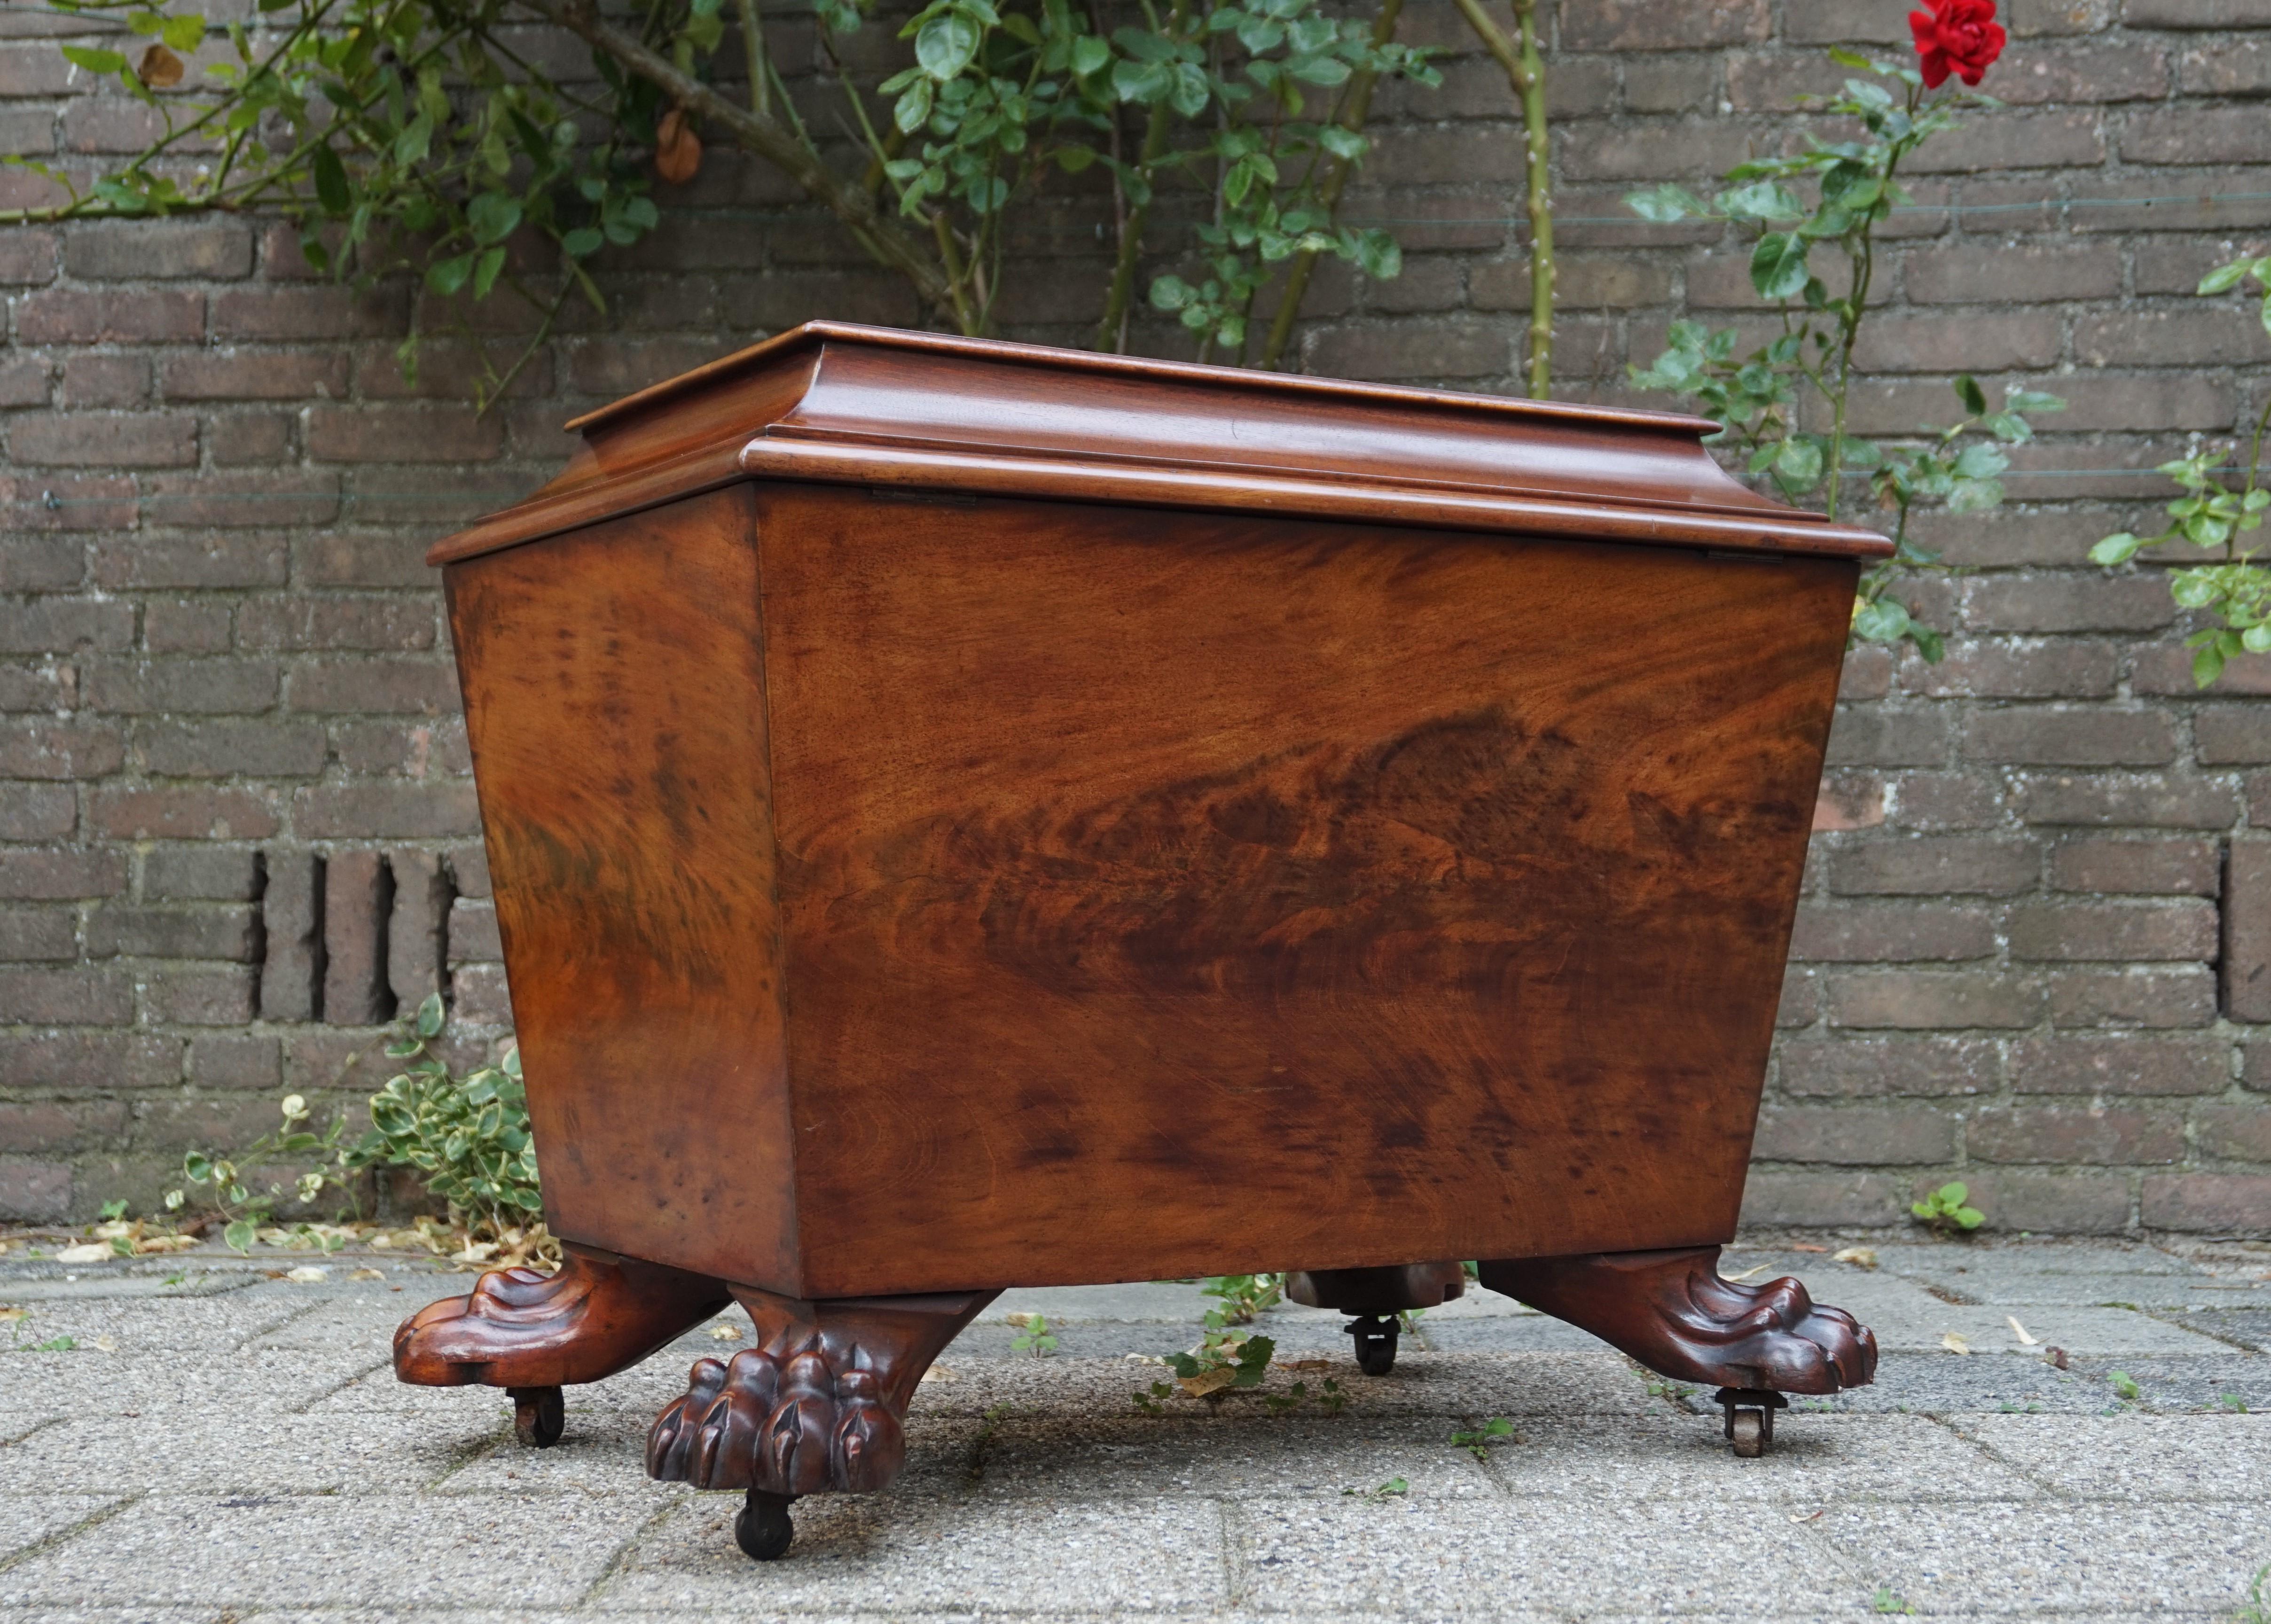 Large & Stunning Early 1800s Regency Sarcophagus Wine Cooler on Original Casters 13